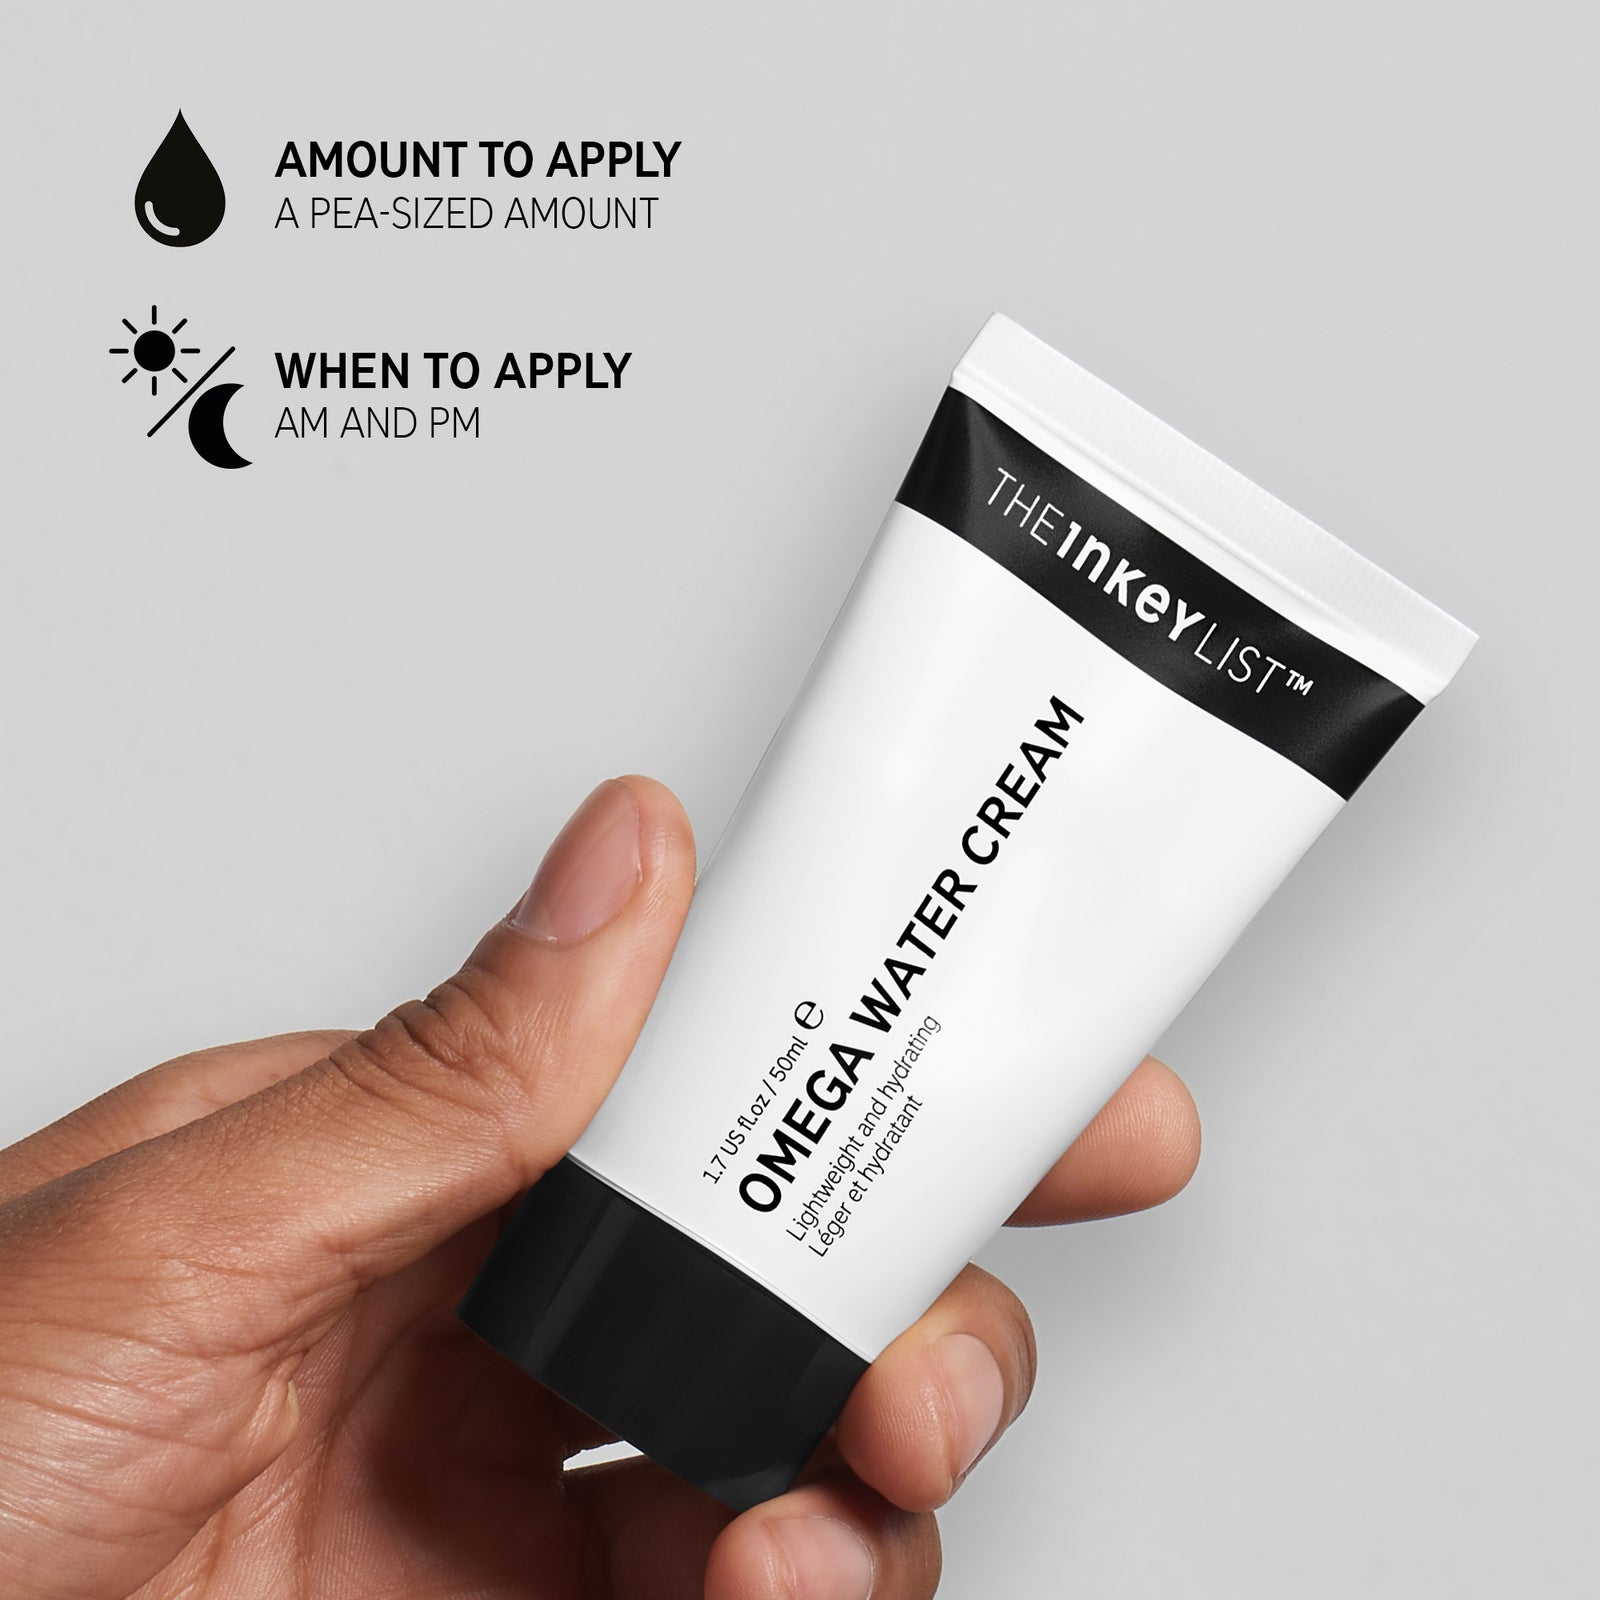 Hand holding Omega Water Cream with black text that reads 'Amount to apply: pea-sized amount' and 'When to apply: AM & PM'